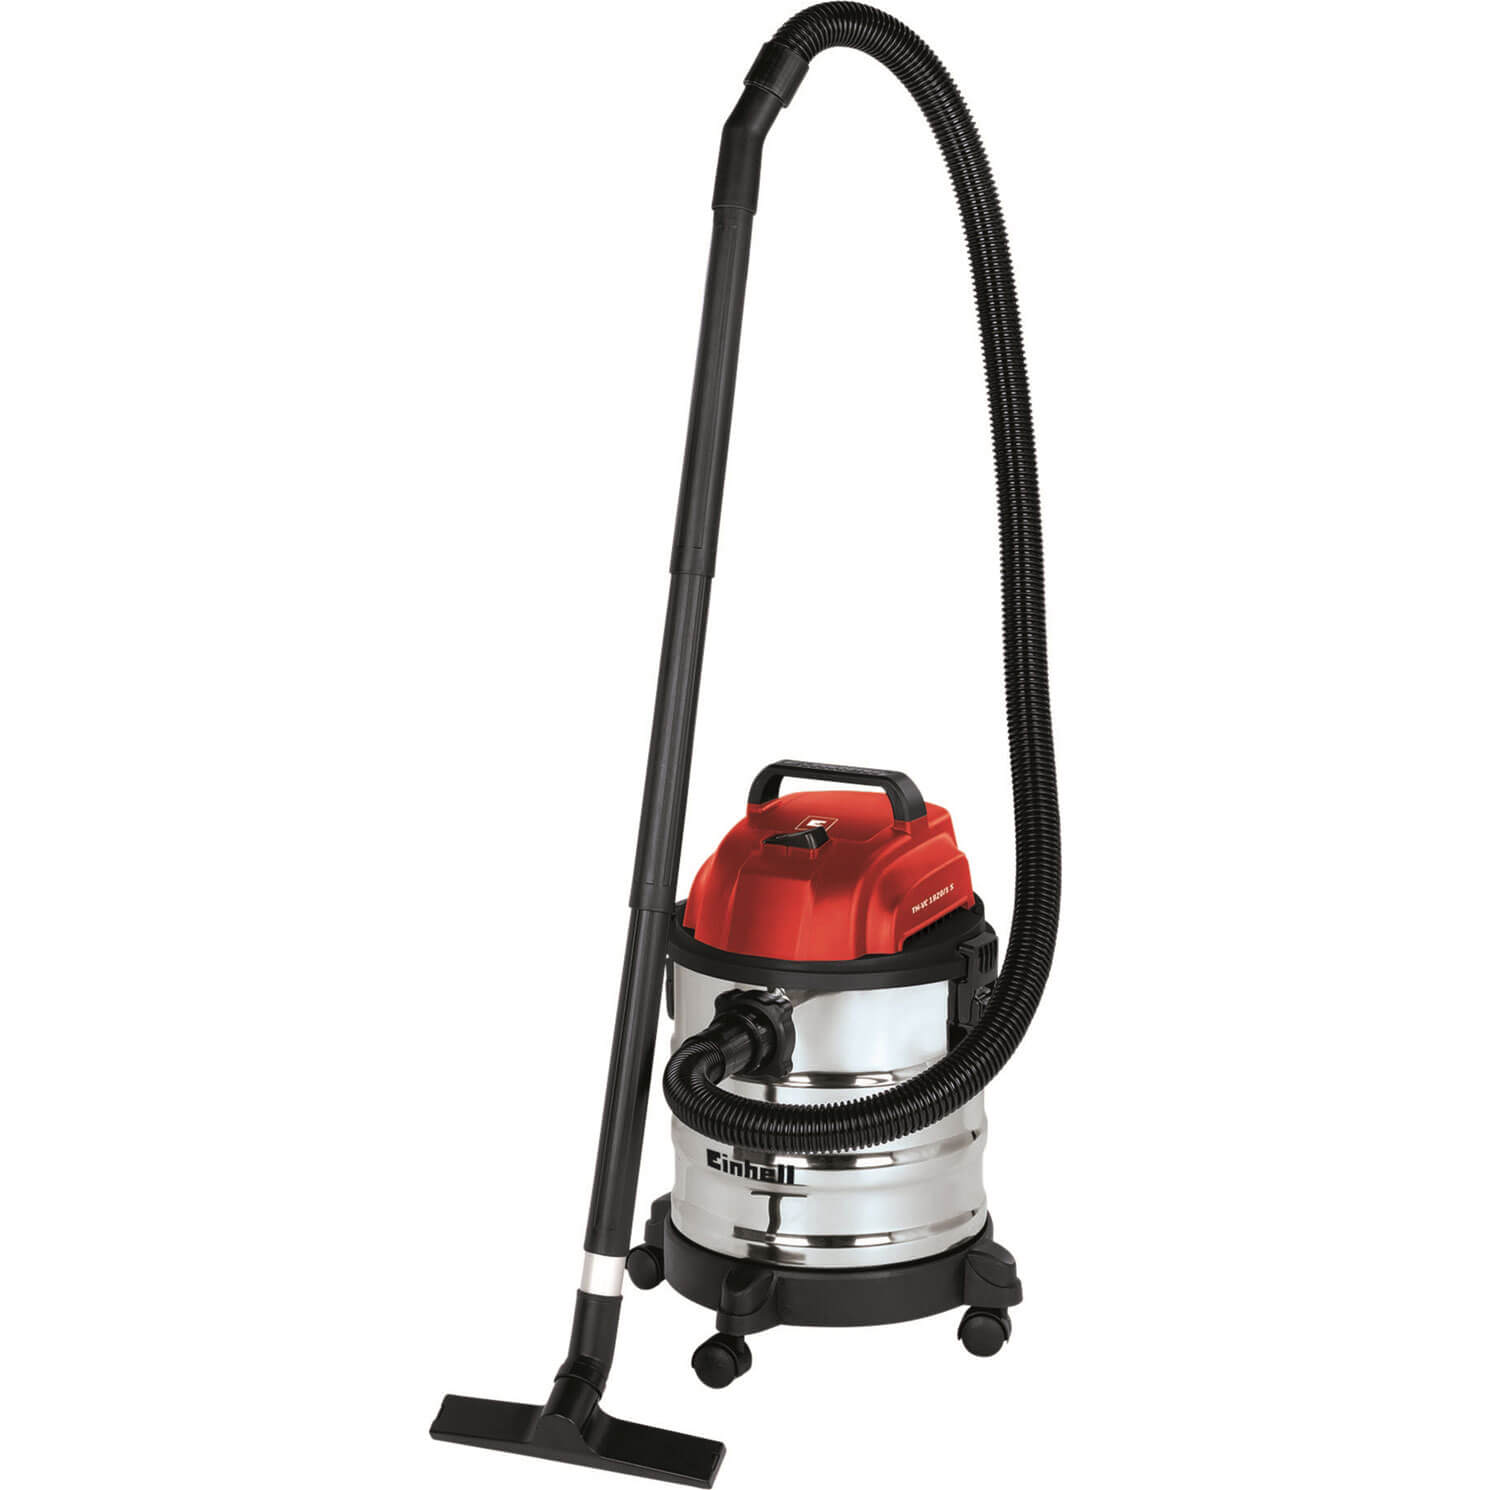 Image of Einhell TC-VC 1820 S Wet and Dry Vacuum Cleaner and Blower 20L 240v